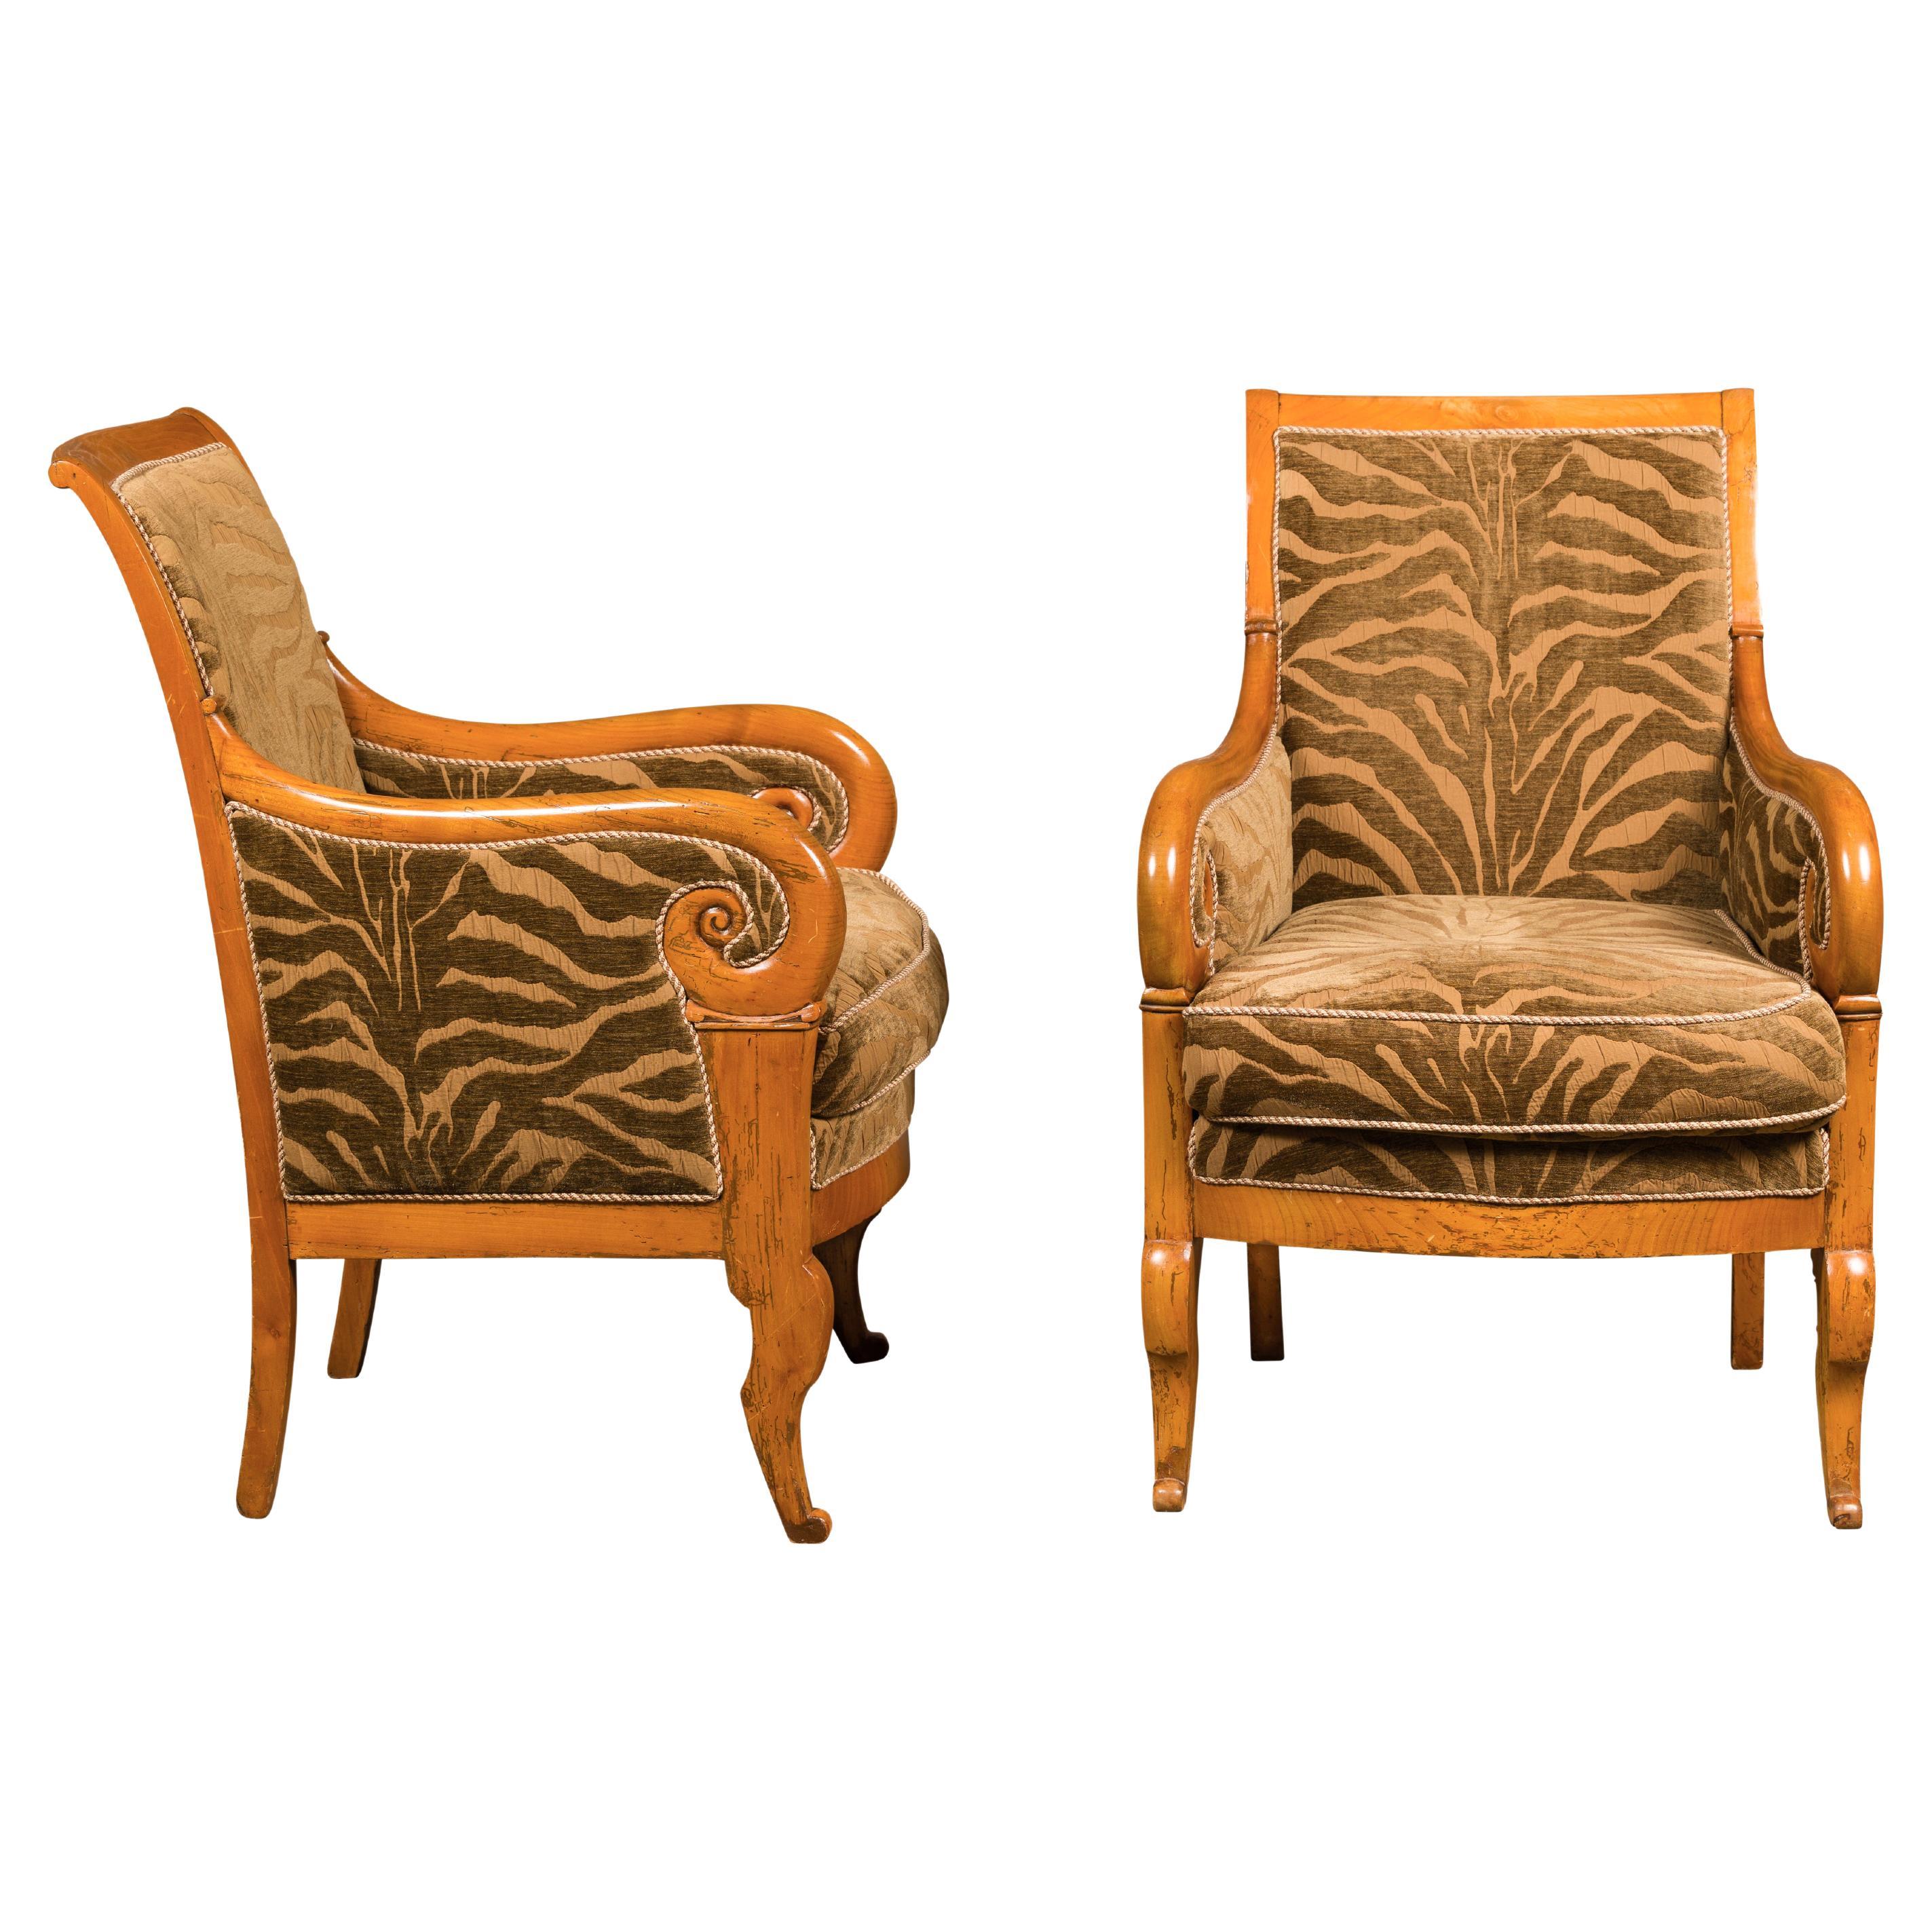 French Walnut 19th Century Bergère Chairs with Carved Arms and Zebra Upholstery